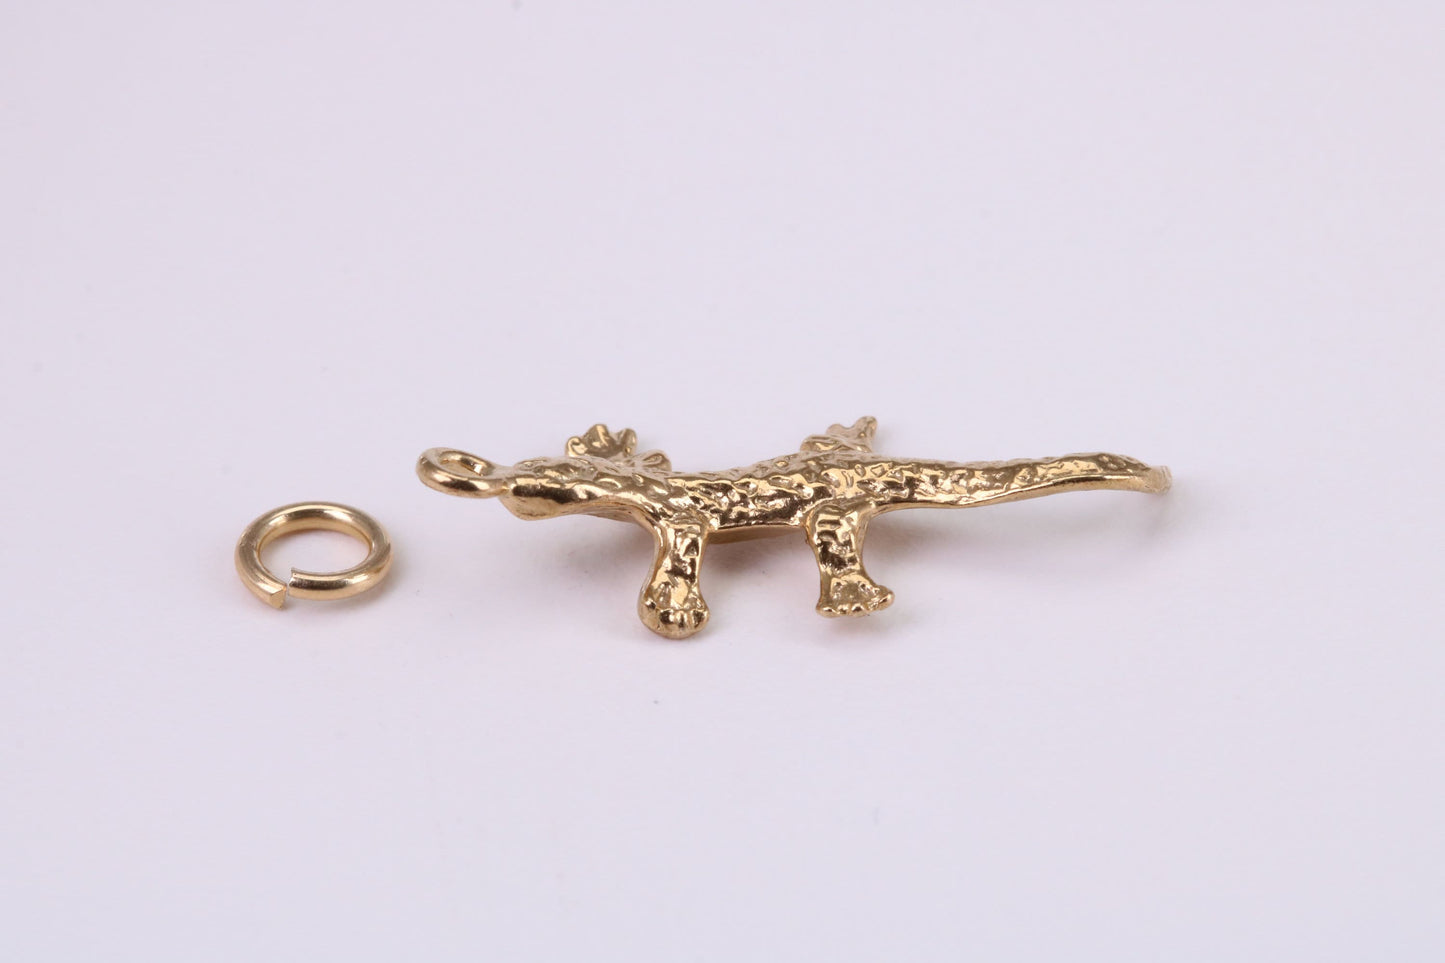 Gecko Lizard Charm, Traditional Charm, Made from Solid Yellow Gold, British Hallmarked, Complete with Attachment Link